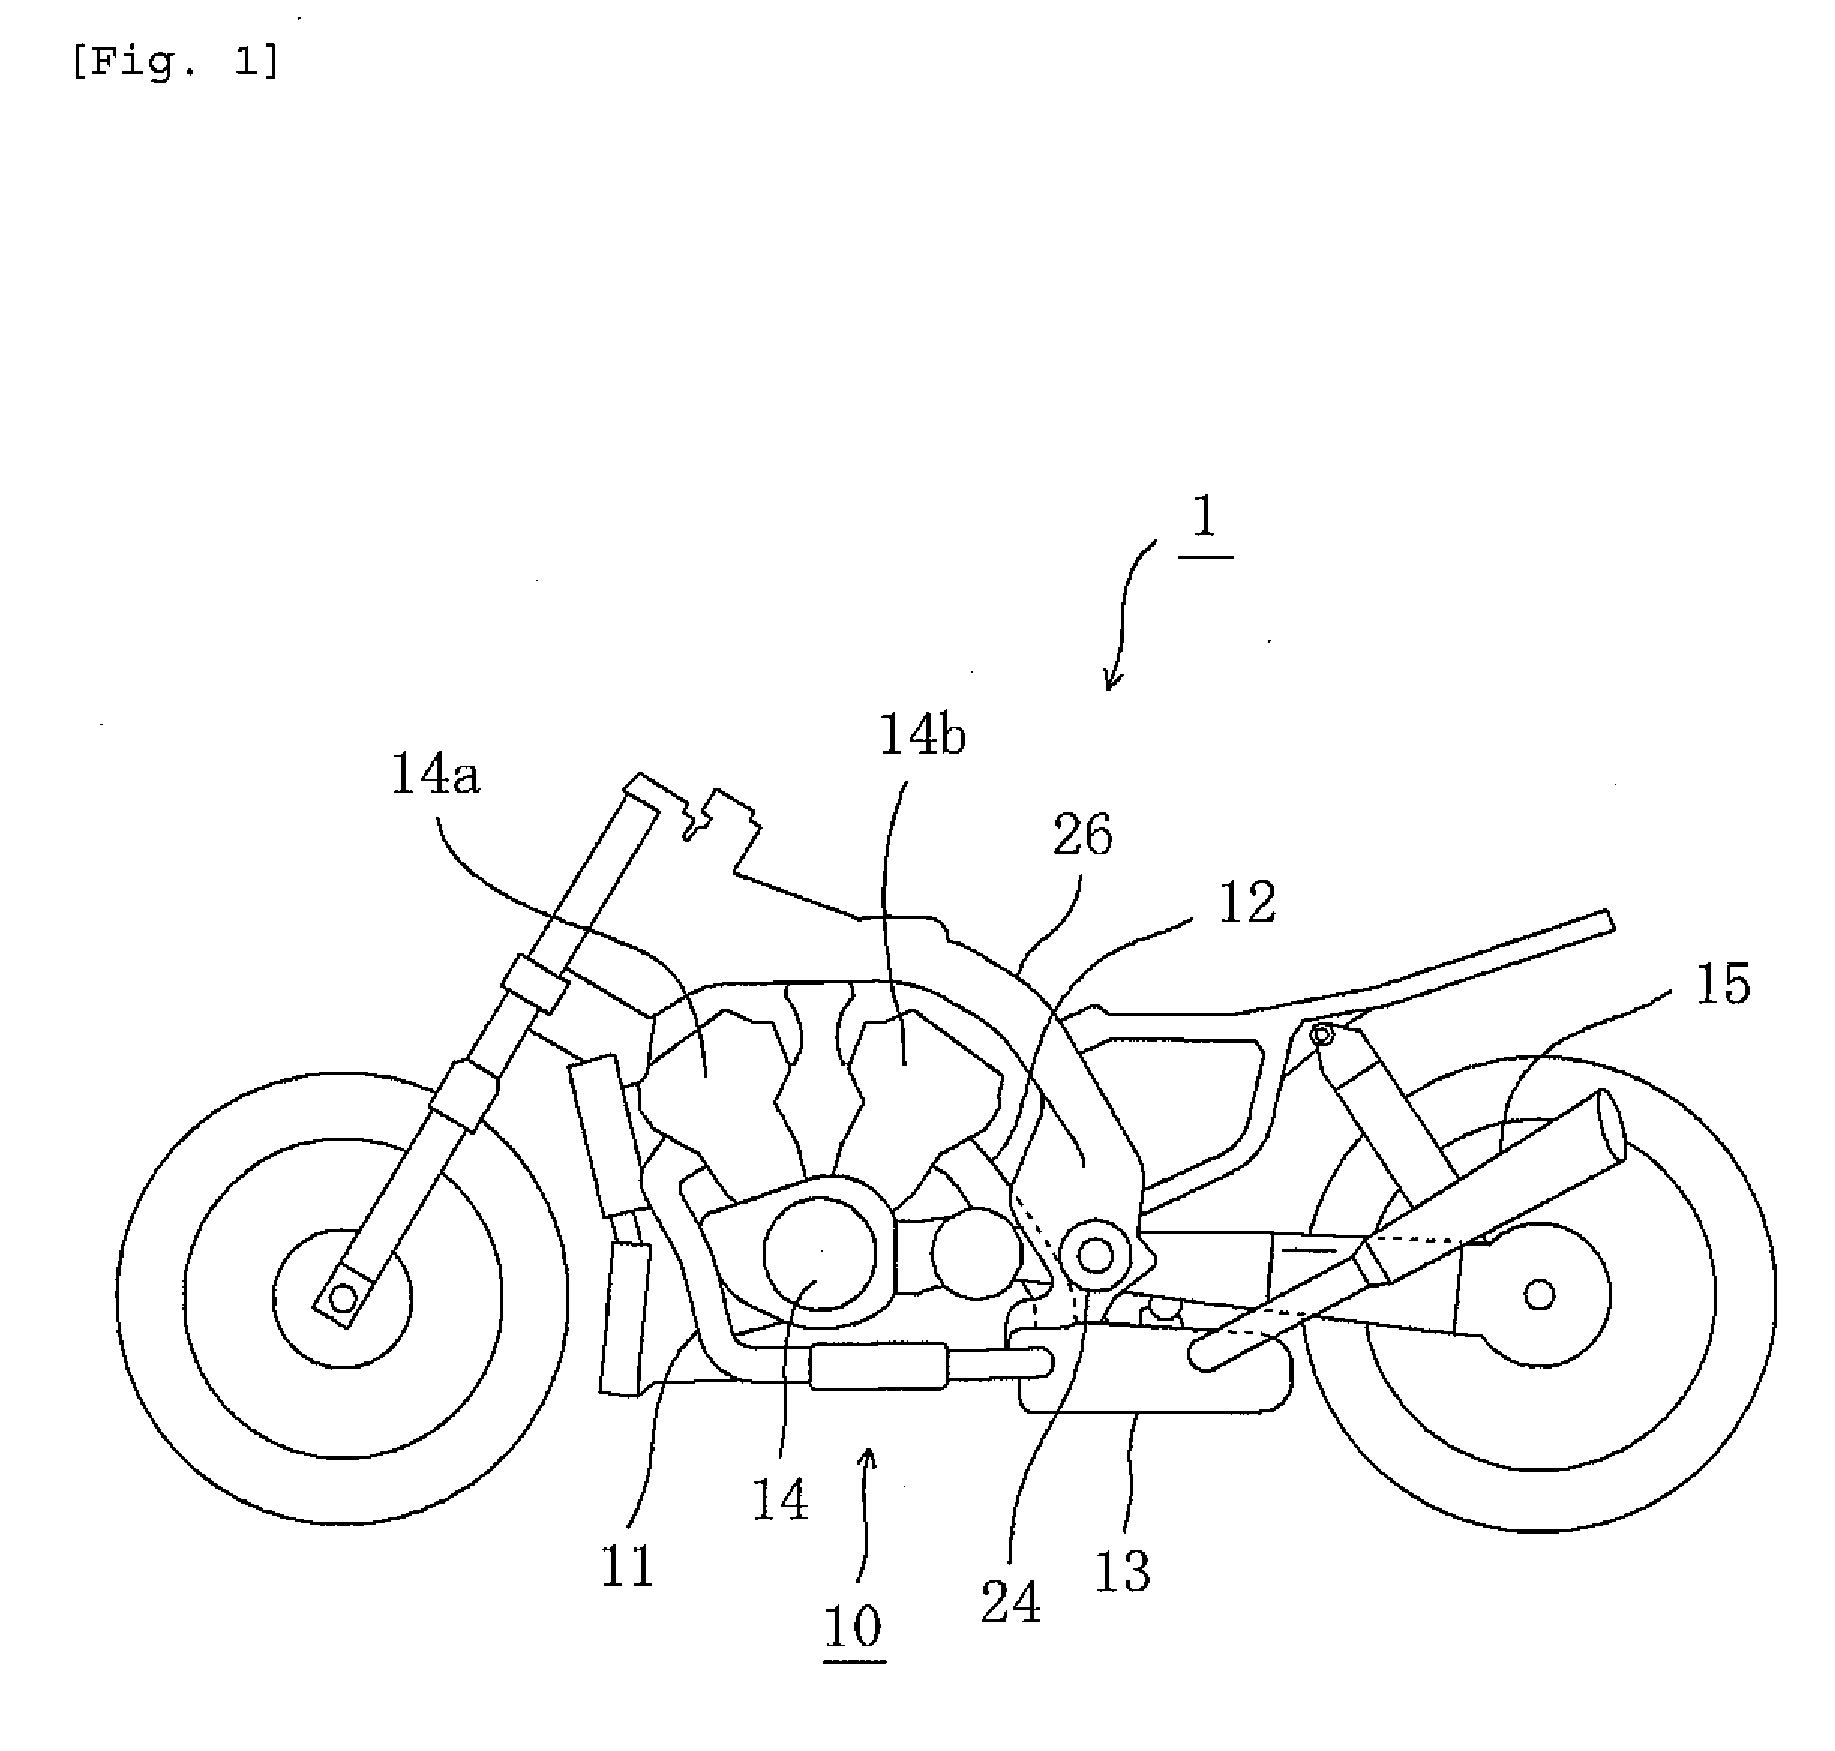 Exhaust System of Motorcycle and Motorcycle Including Exhaust System